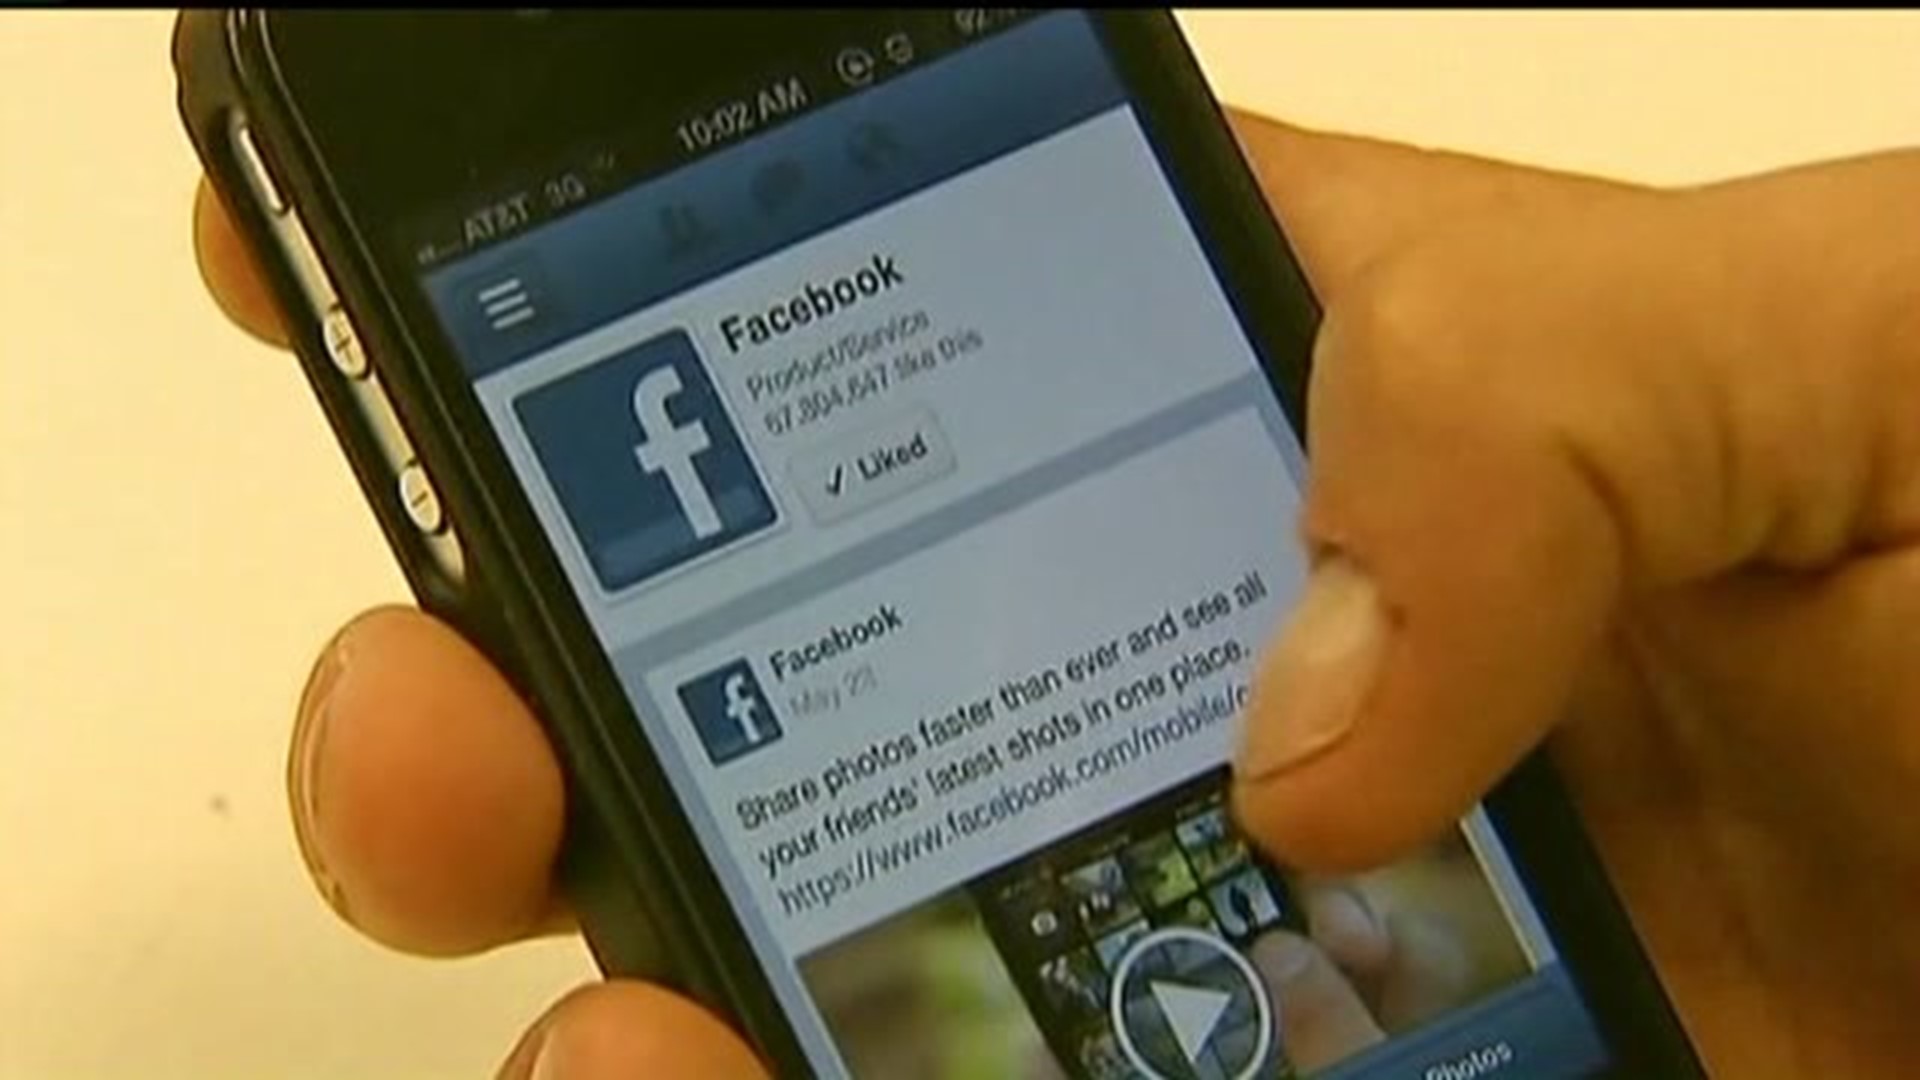 Social media holds growing role in helping authorities solve crimes